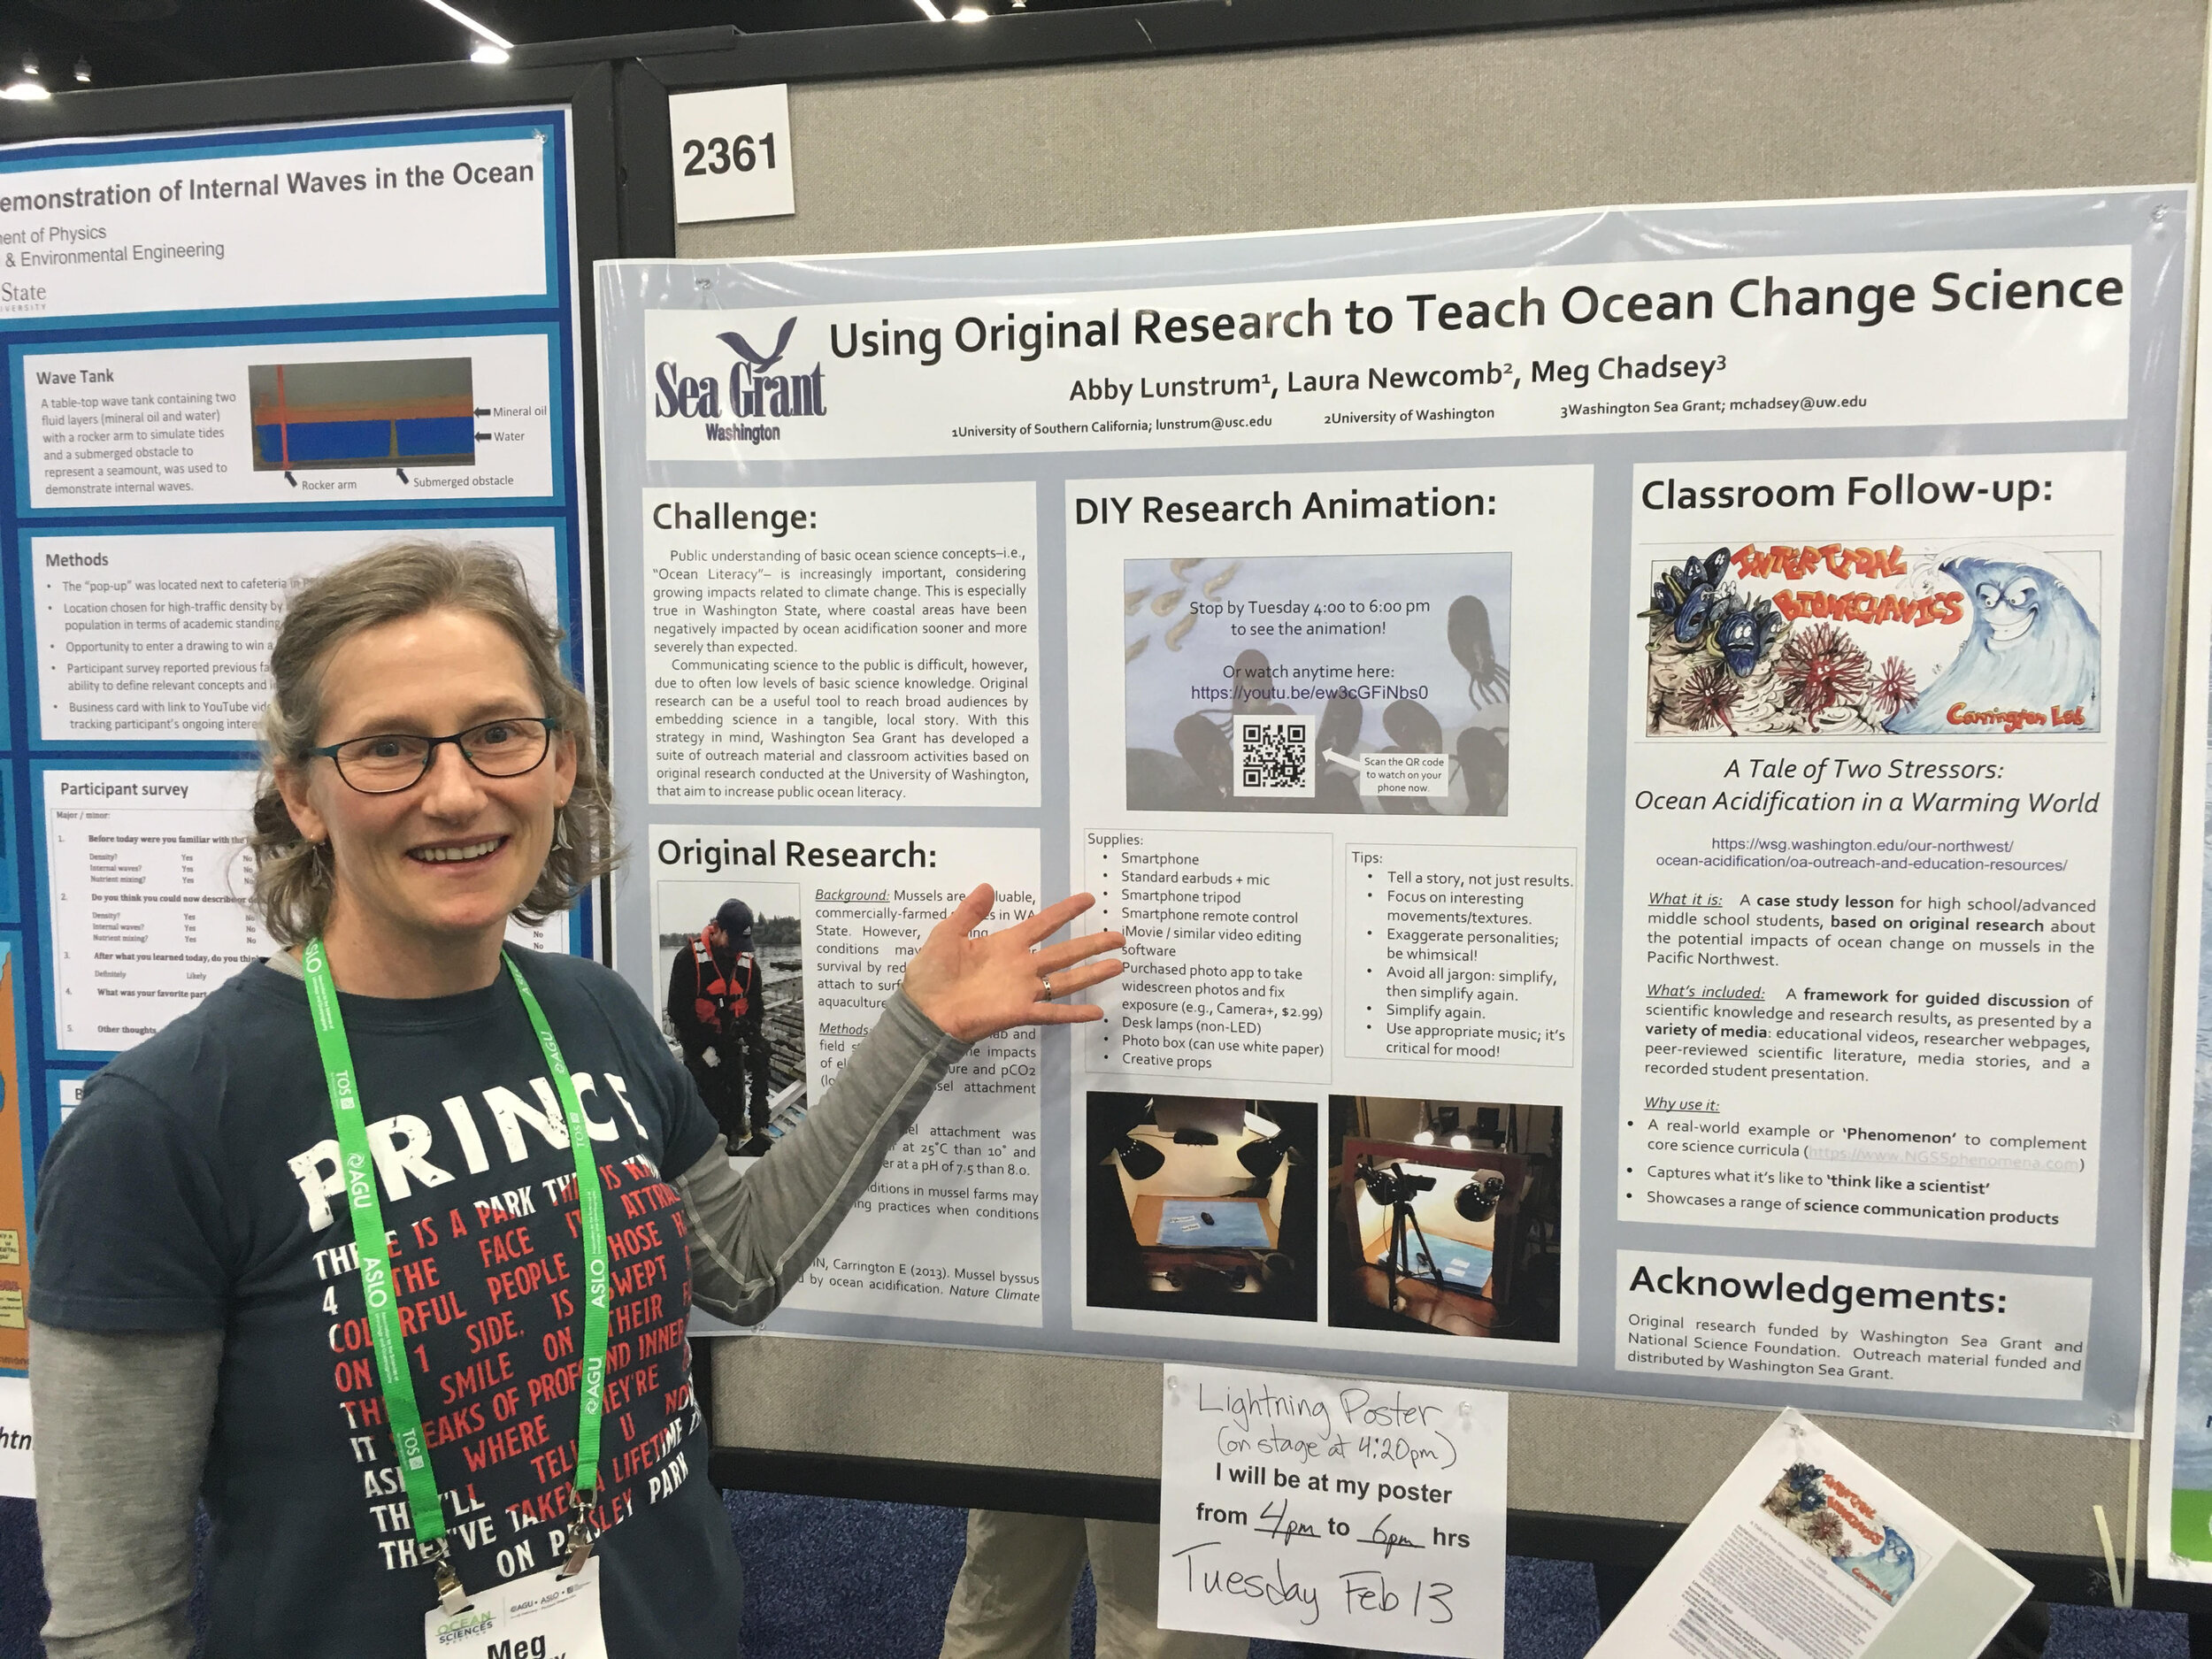  Presenting a poster about an ocean acidification lesson based on Washington Sea Grant research at the 2018 Ocean Sciences Meeting. 